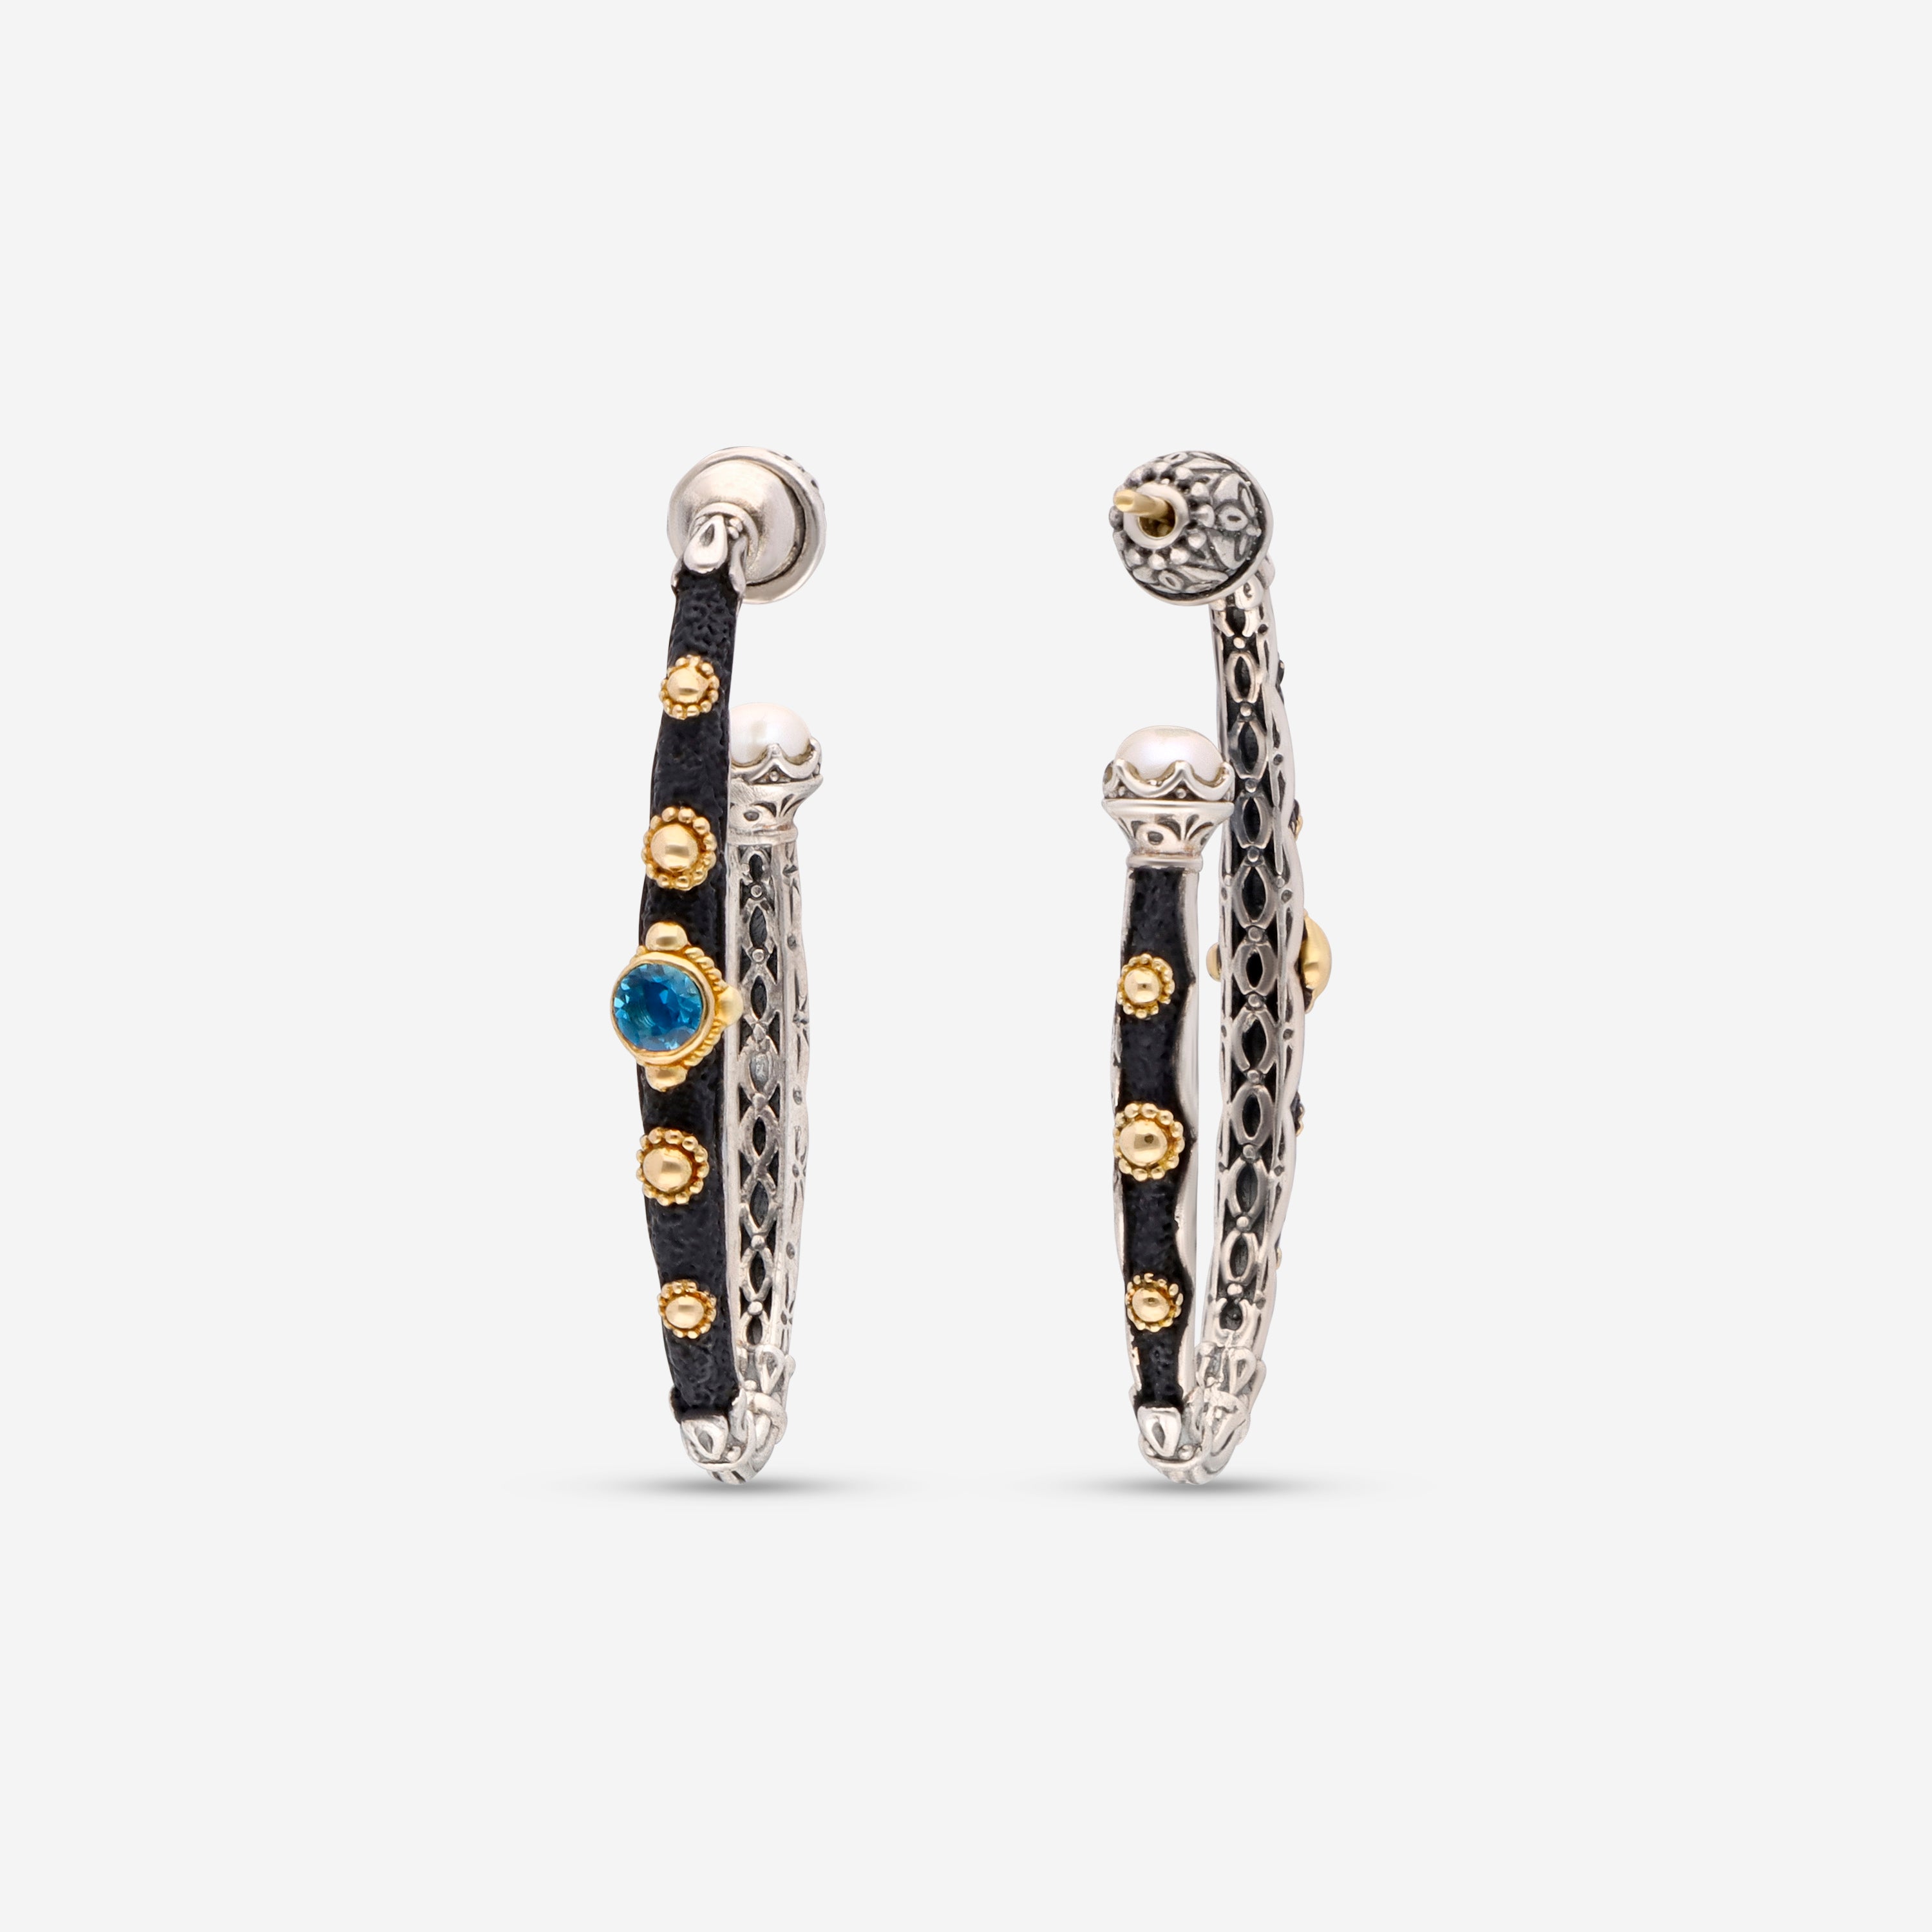 Konstantino Nemesis Sterling Silver and 18K Yellow Gold, London Blue Topaz and Pearl Earrings SKMK3124-317-CUT